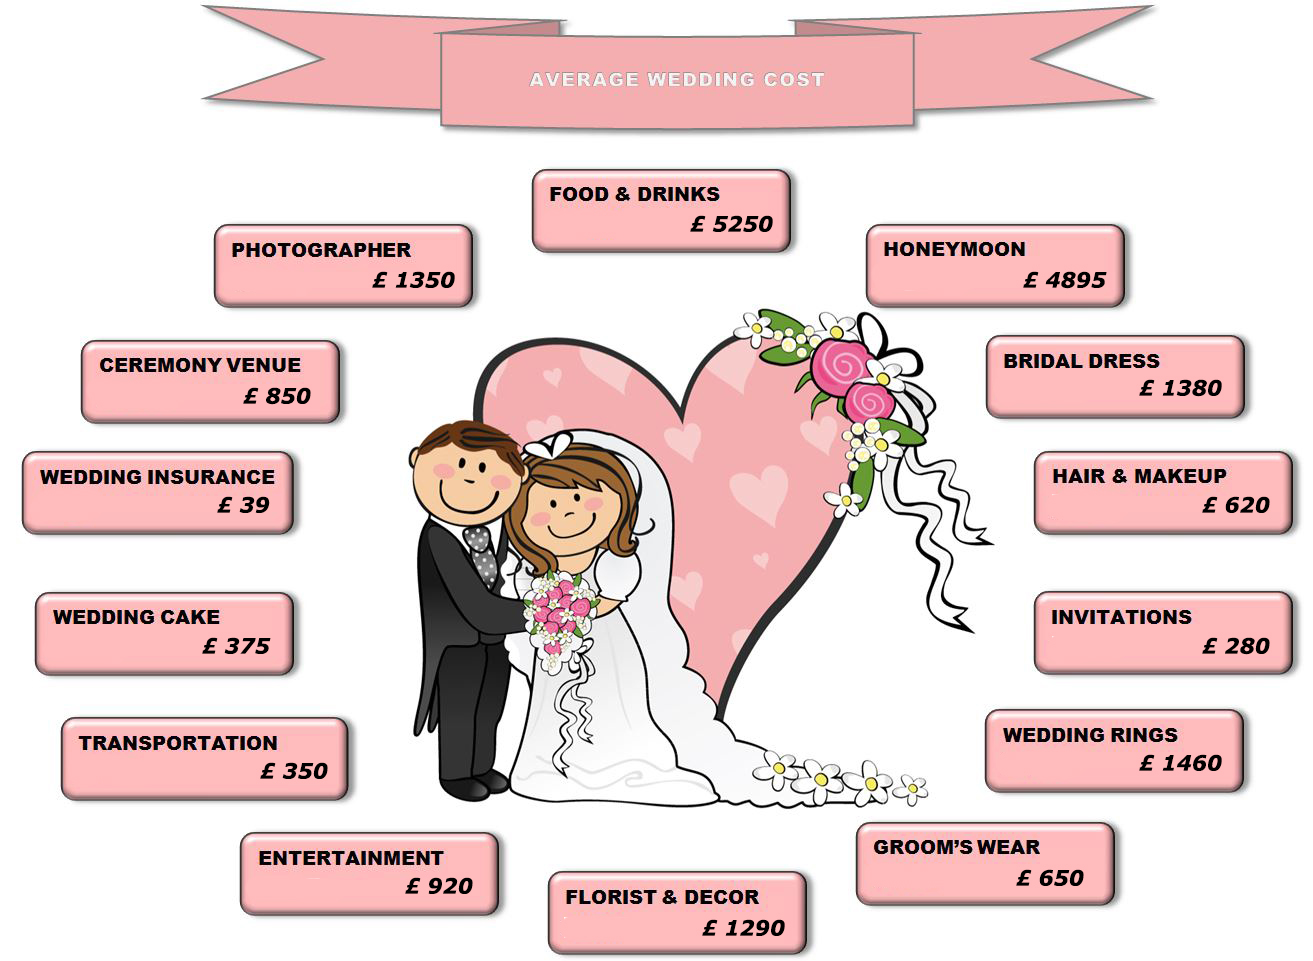 clipart of a Bride and Groom in the centre of some average wedding cost price tags